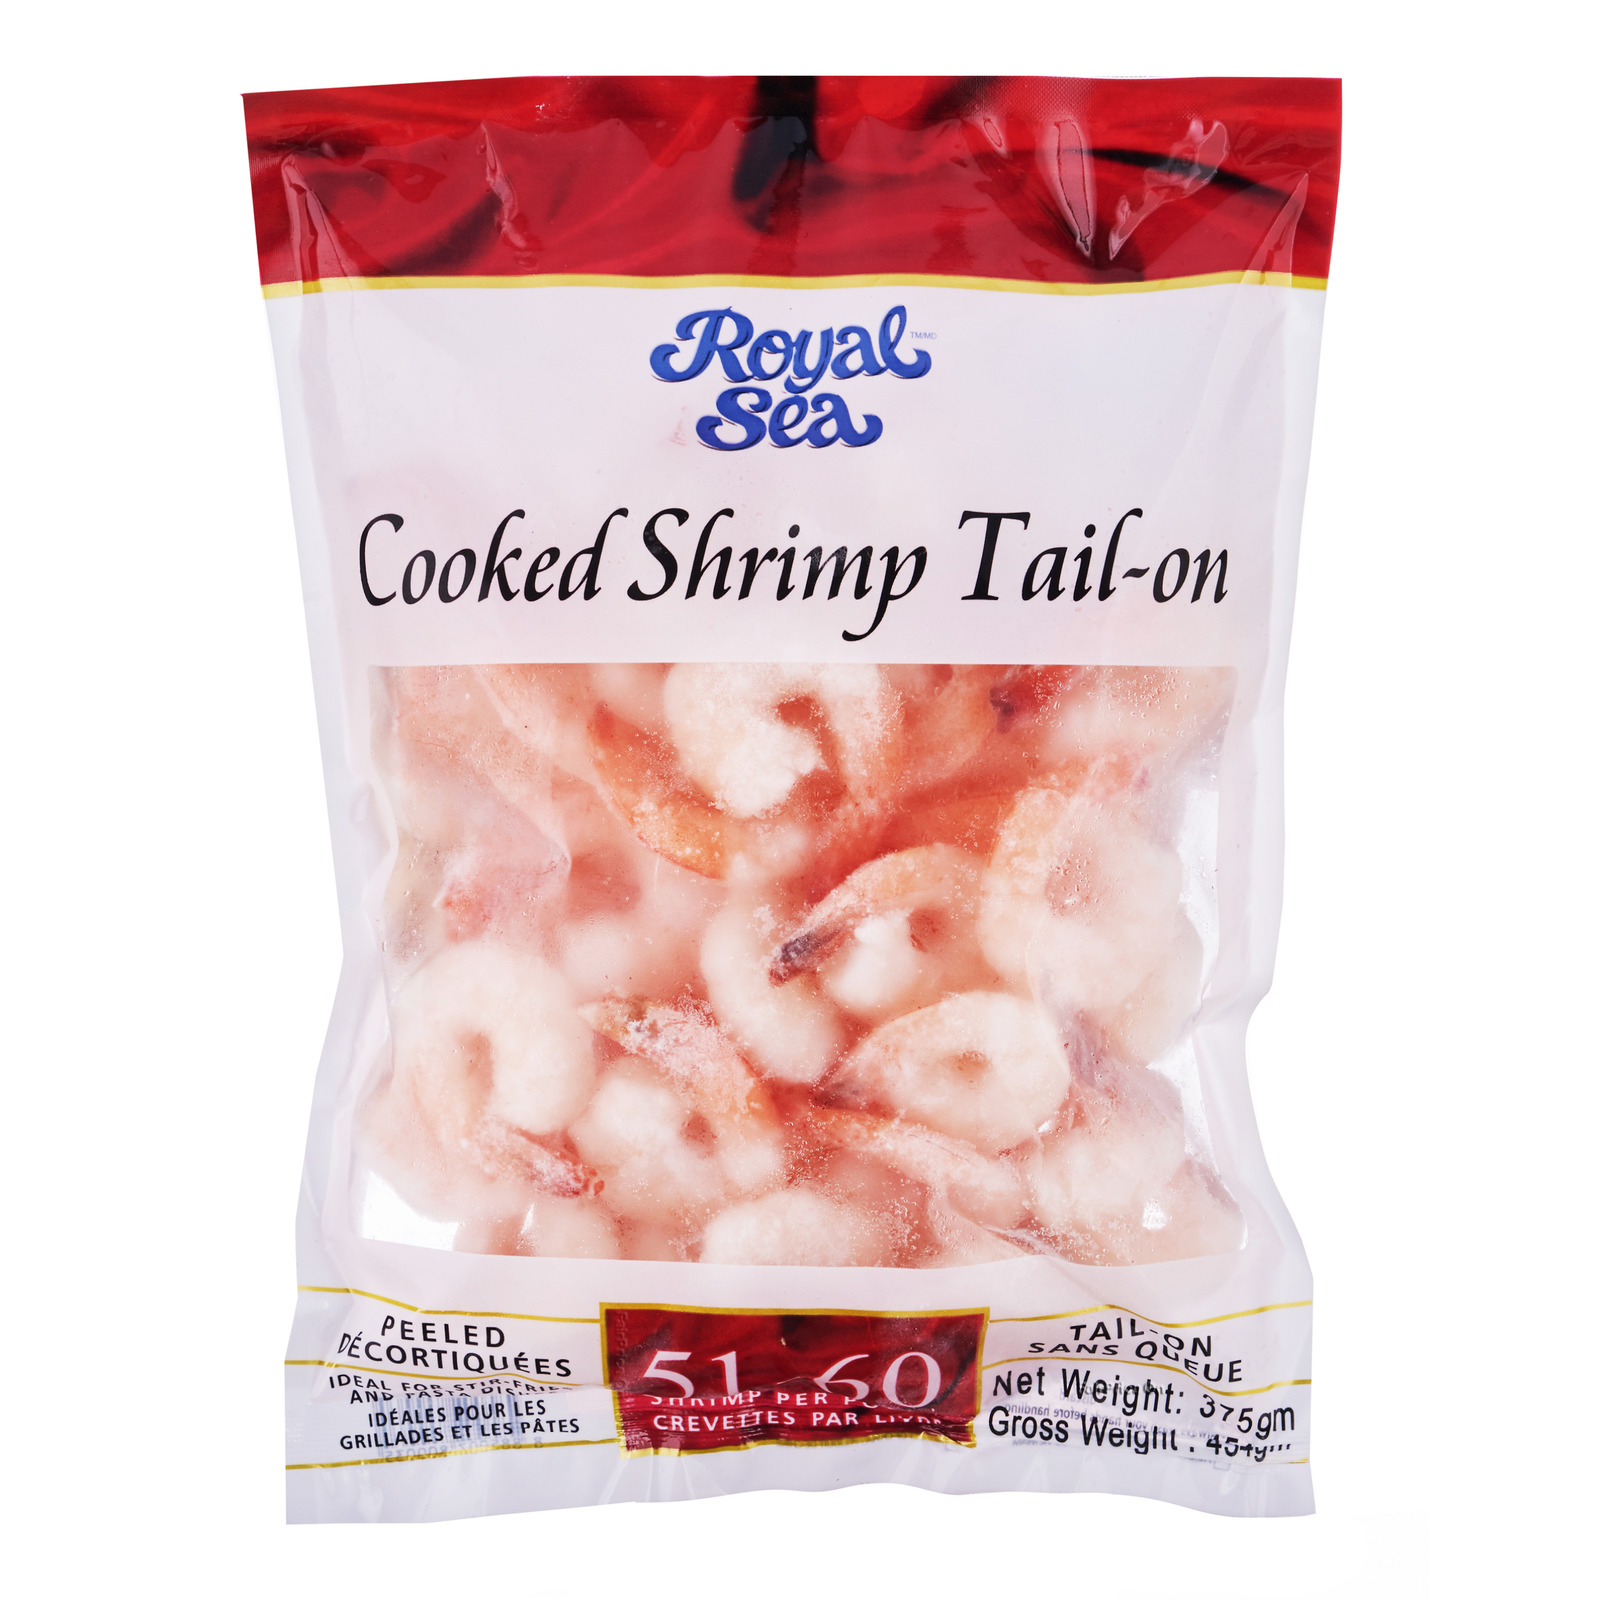 Royal Sea Frozen Shrimp - Cooked (Tail-on)